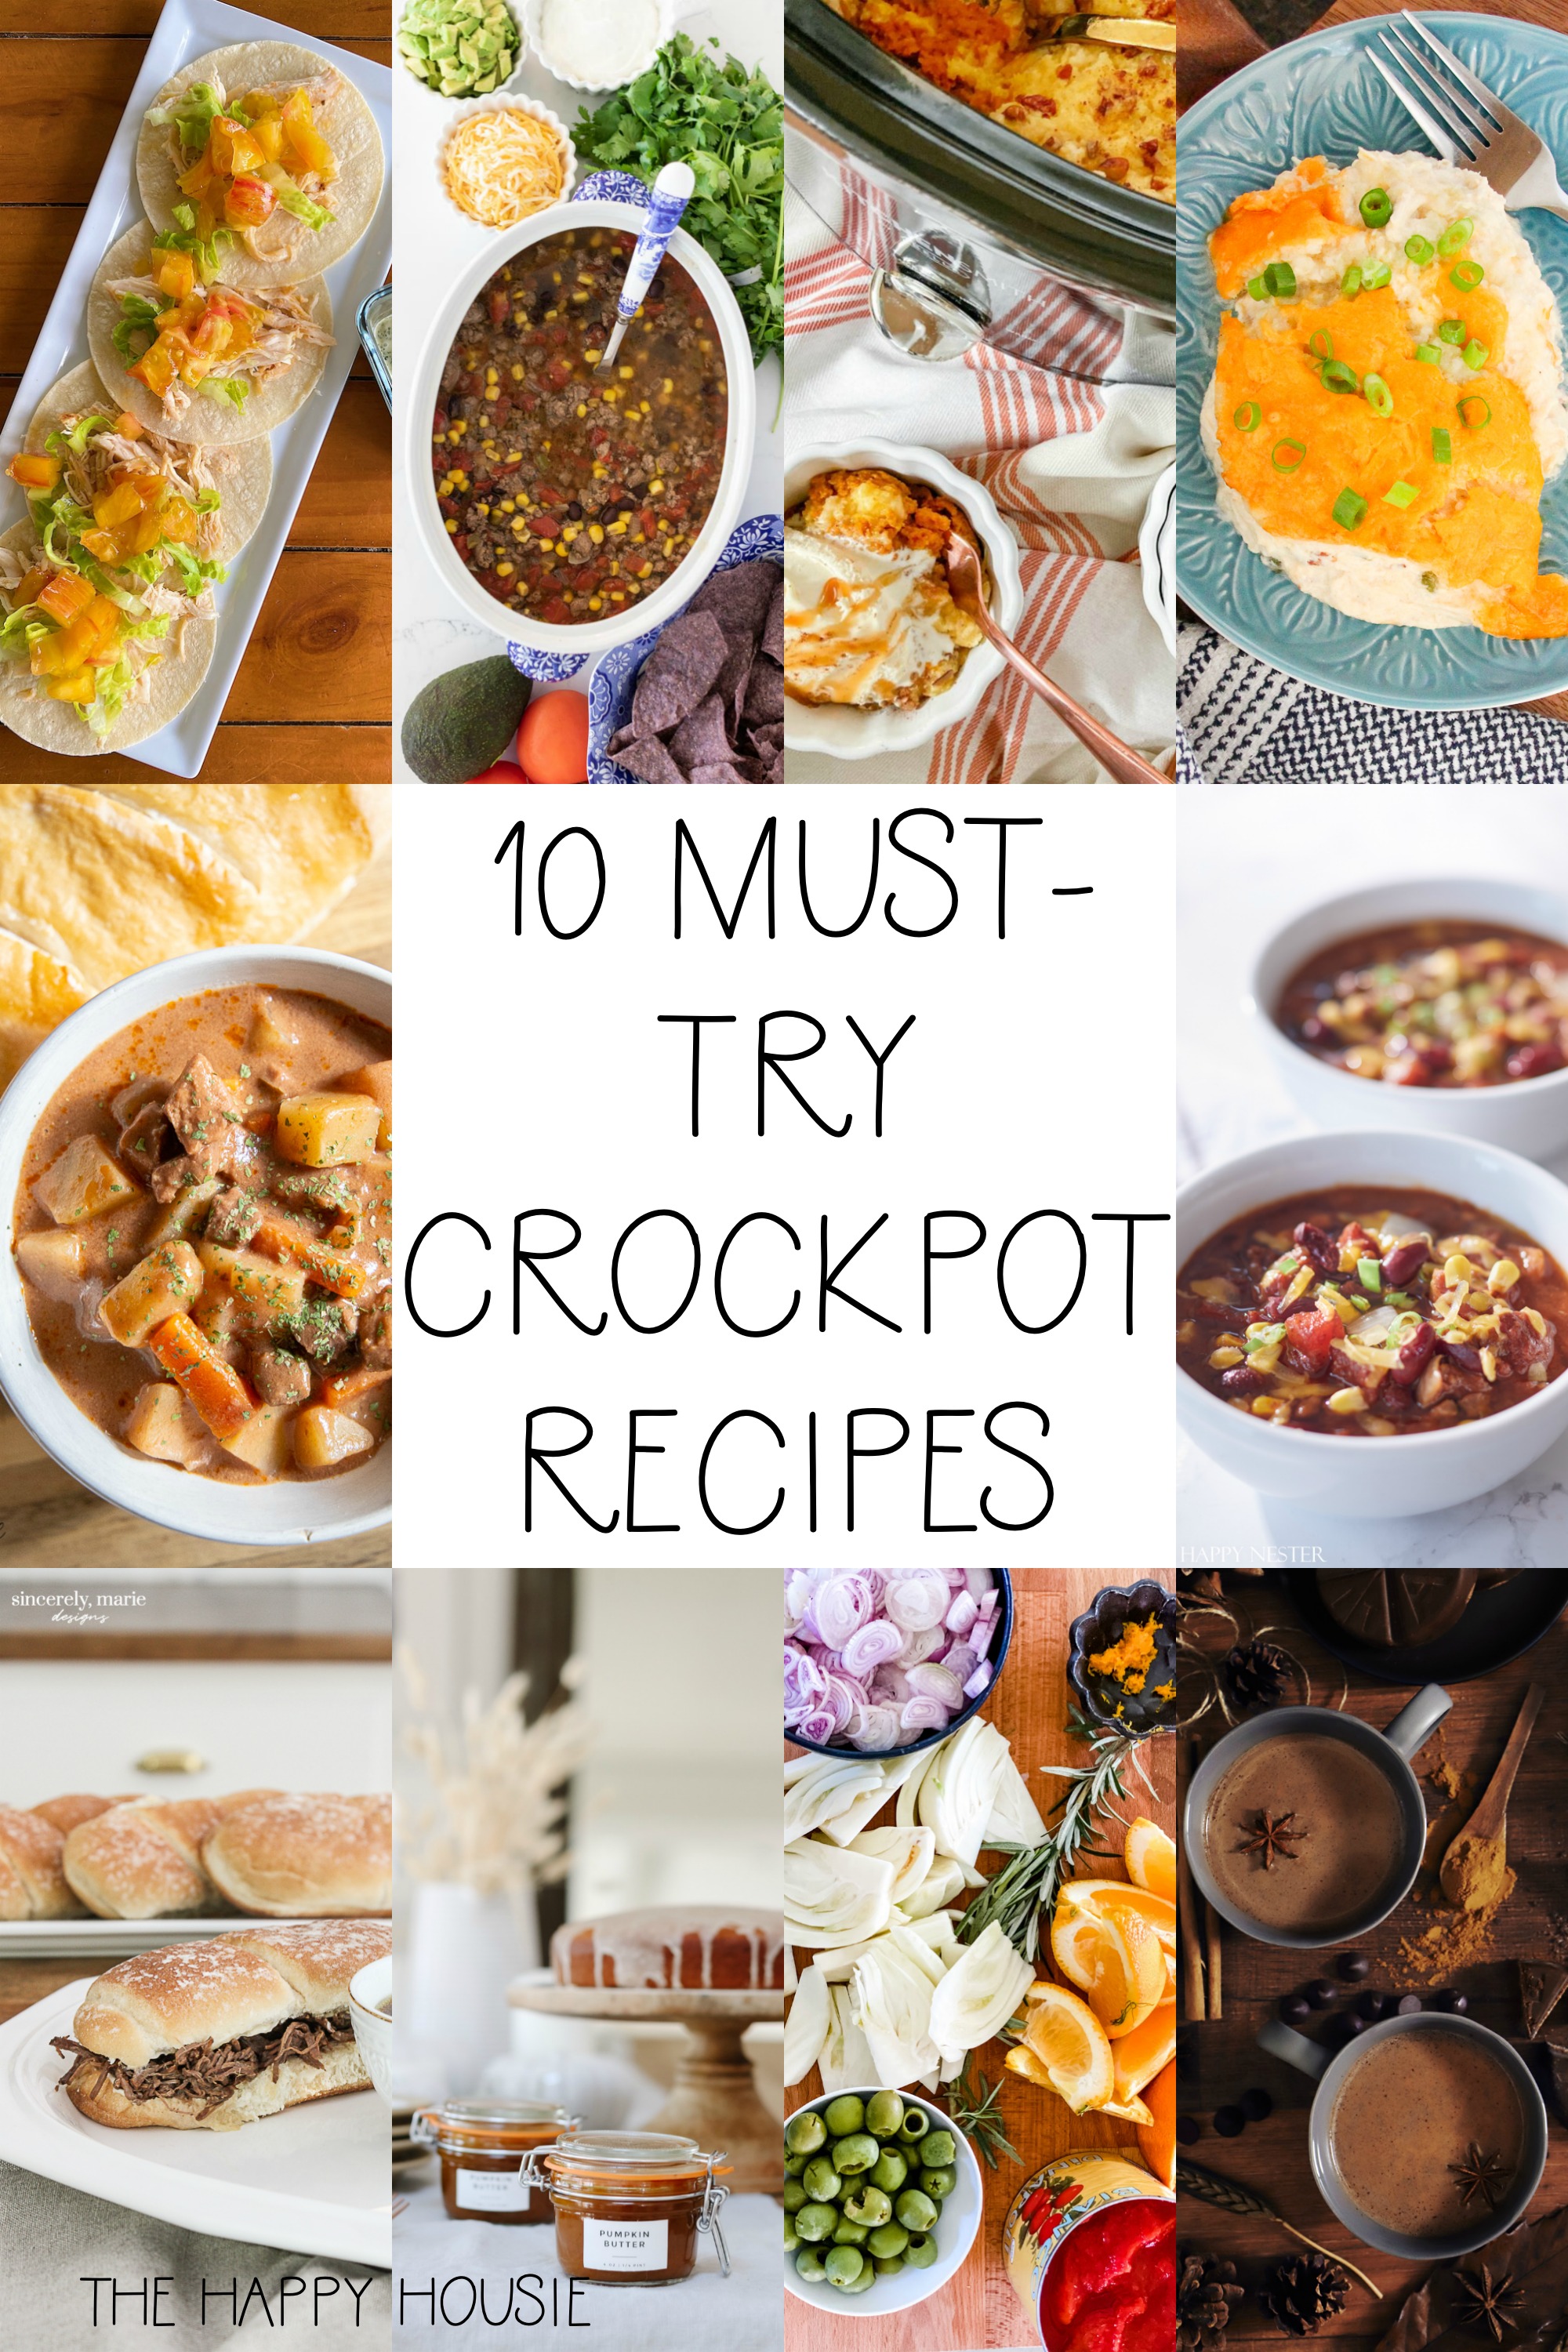 10 Must Try Crockpost Recipes graphic.